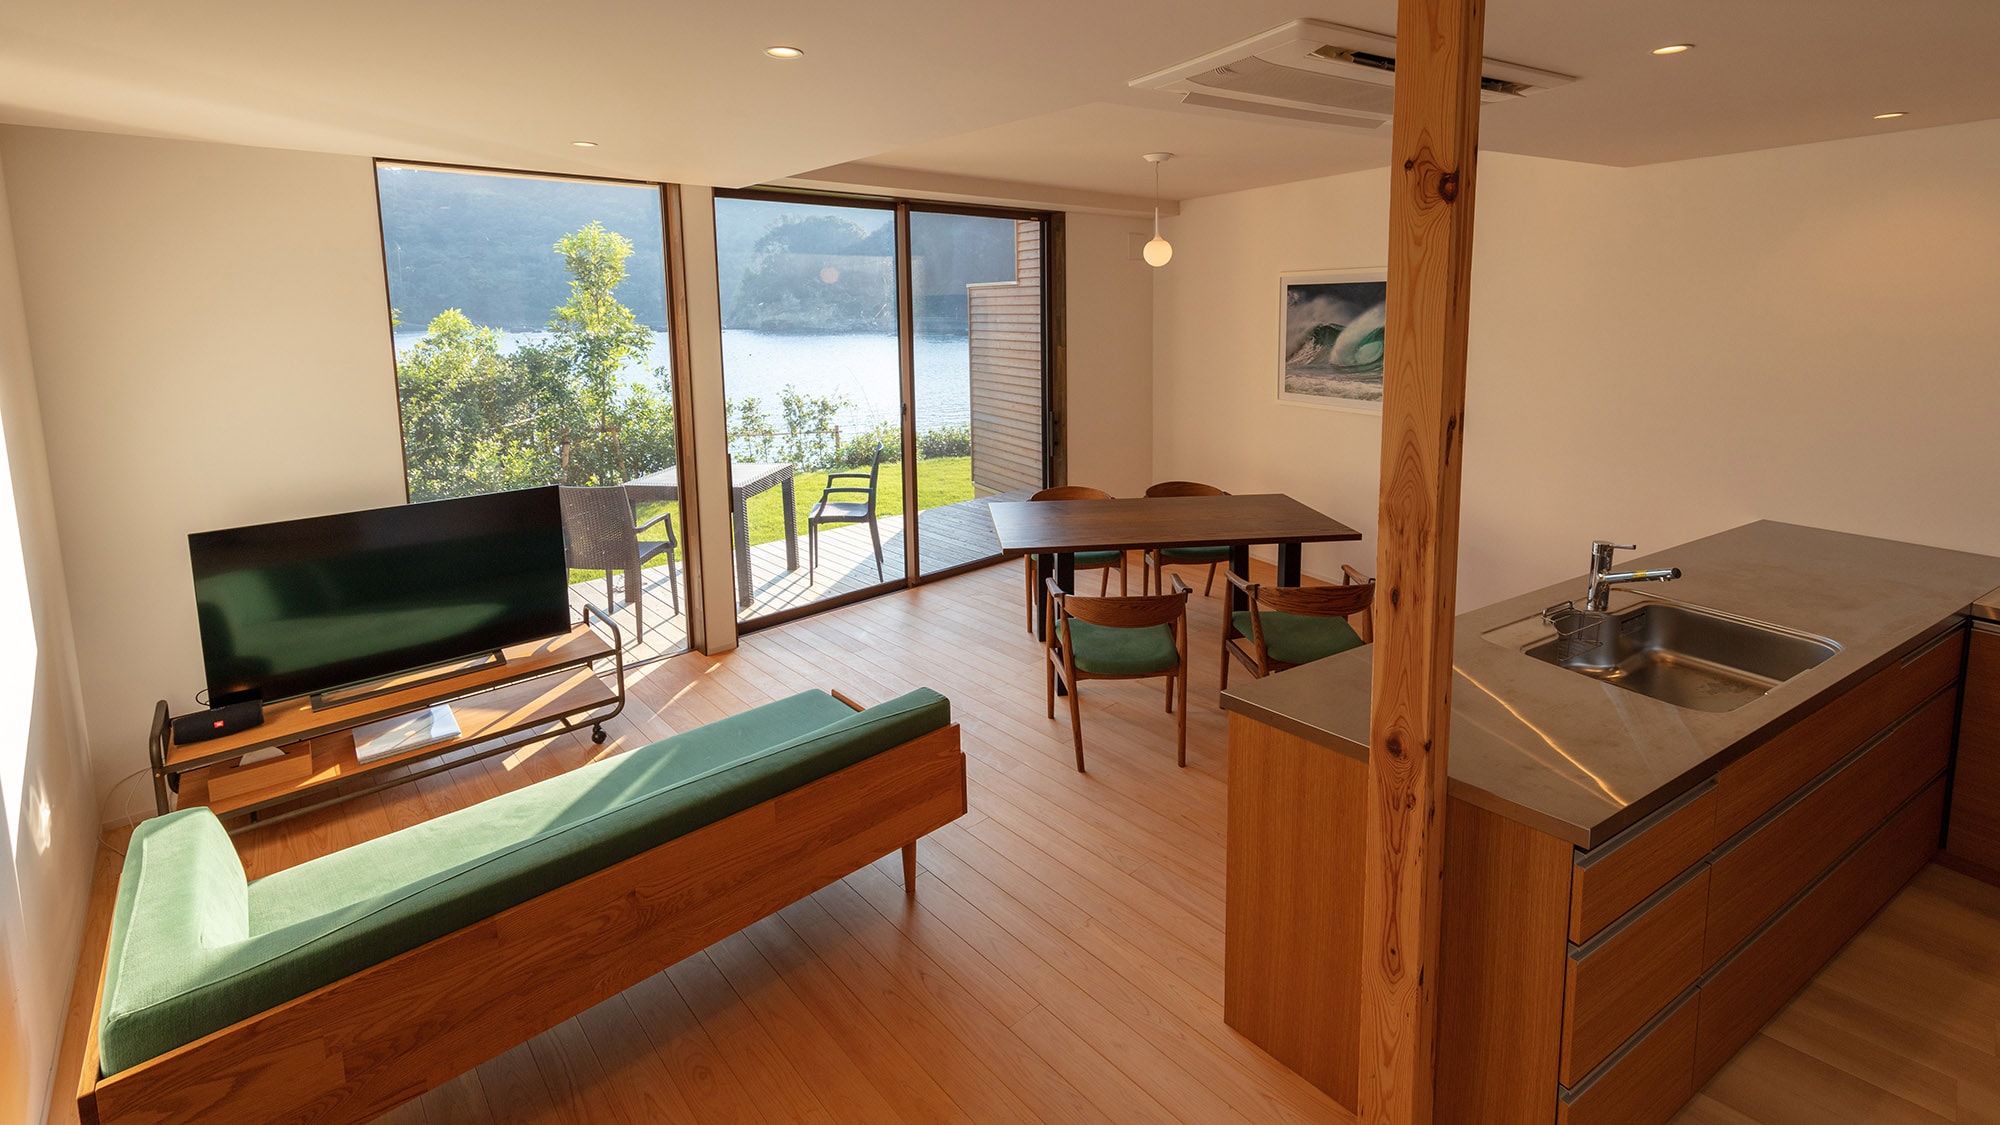 ・[Kabuto B Living/Dining Room] Maisonette type rental villa! Enjoy with a small group or family